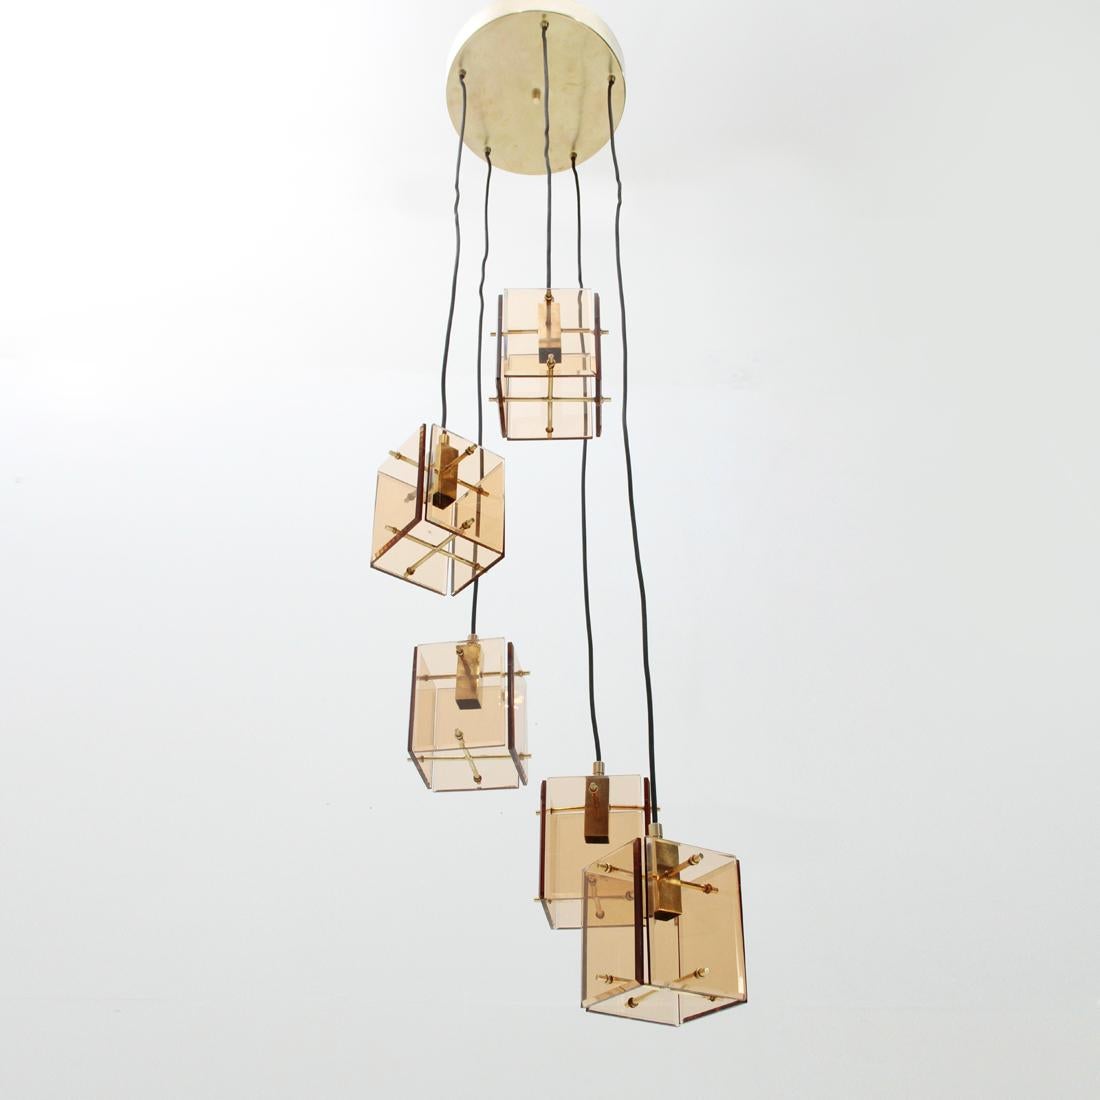 Italian manufacturing chandelier produced in the 1950s by Zero Quattro of Milan.
Rosette in brass.
Brass and pink glass diffusers.
Adjustable speaker height.
Structure in good condition, some signs due to normal use over time.

Dimensions: